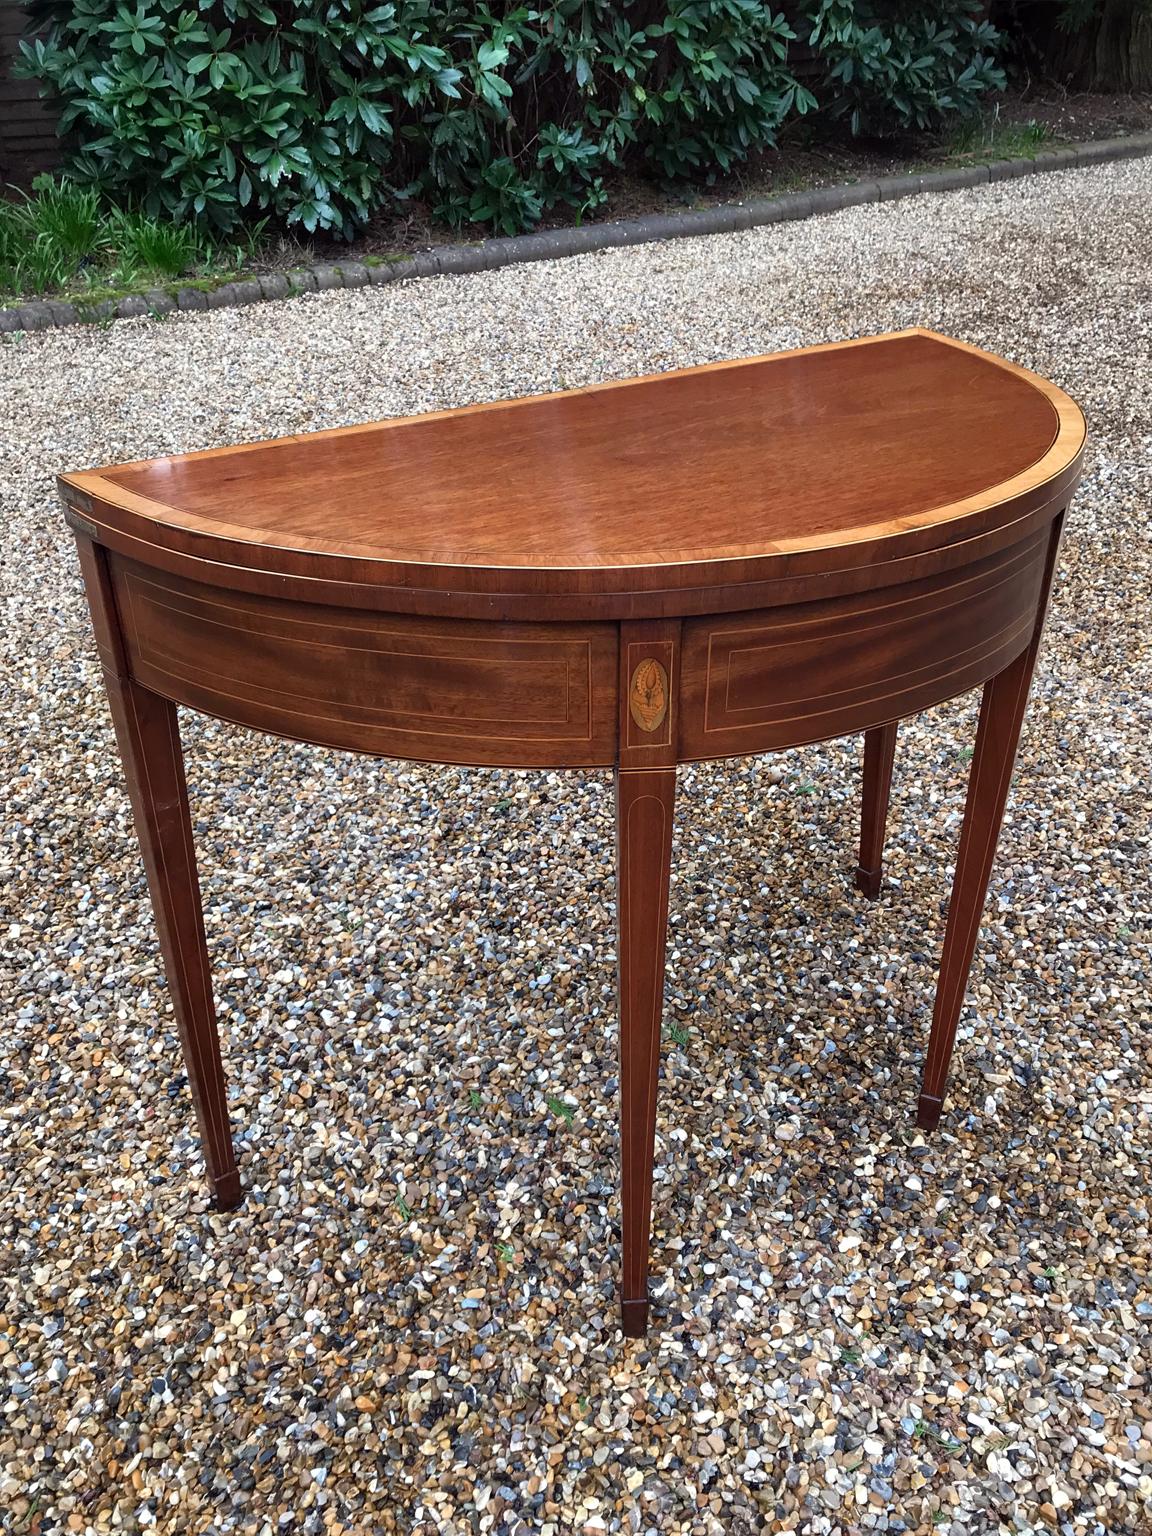 British 19th Century Mahogany Demilune Card Table For Sale